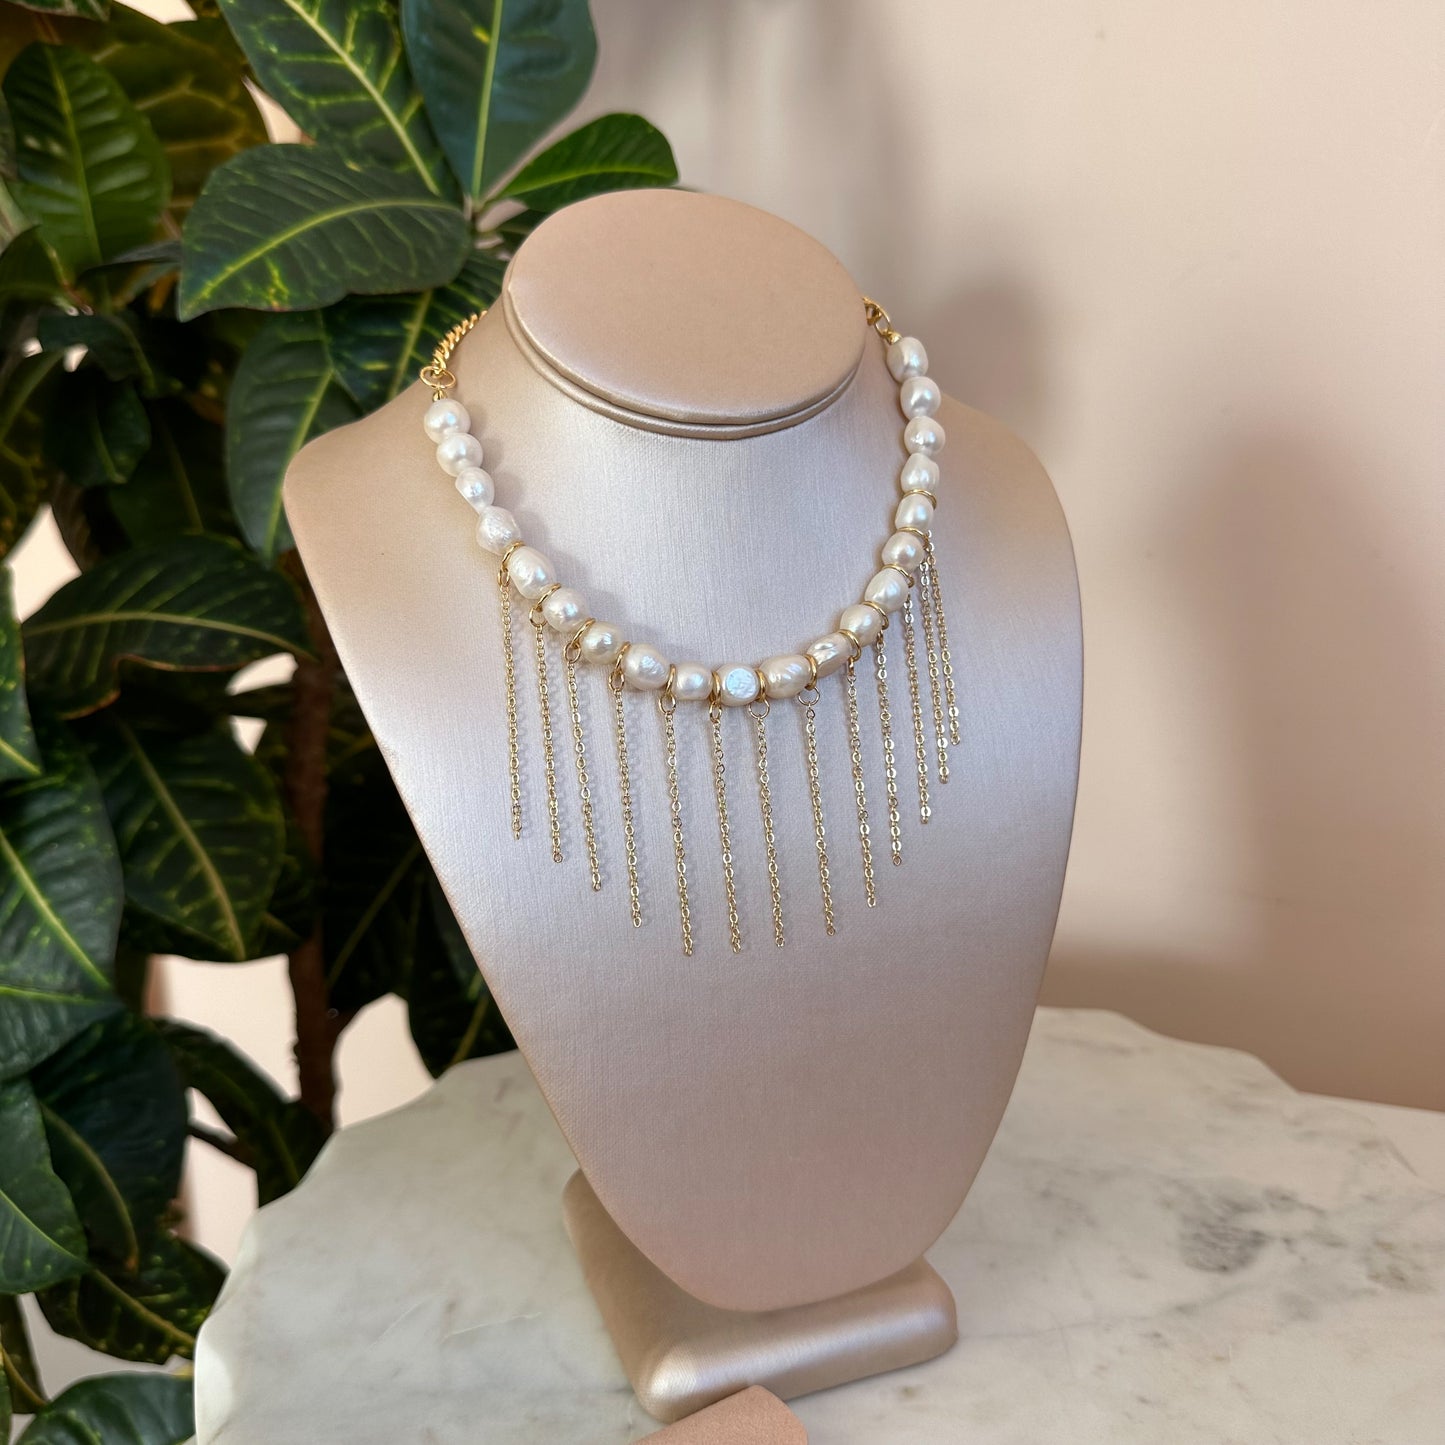 Natural pearl necklace with chains